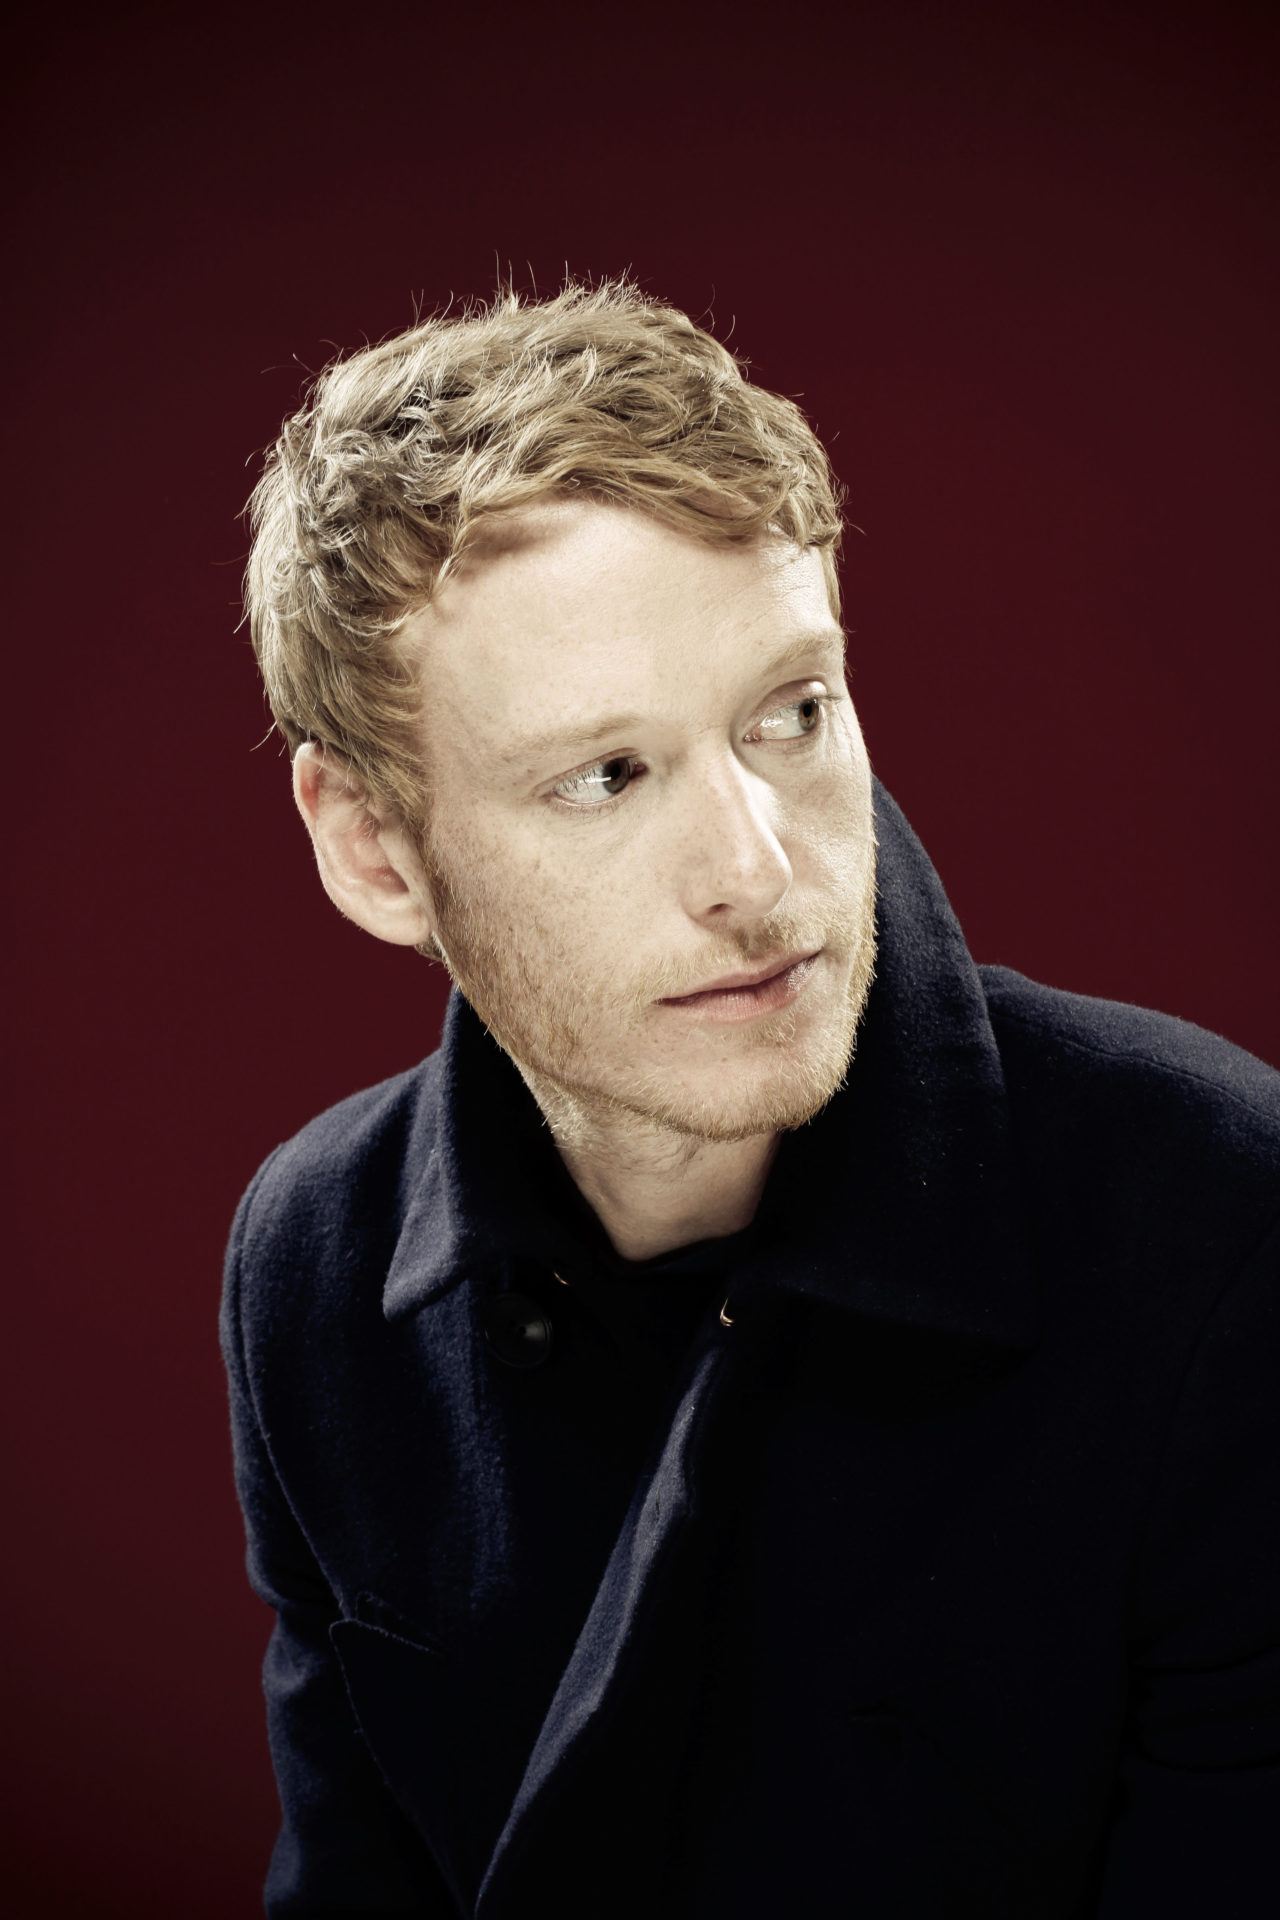 Teddy Thompson play Backstage in November